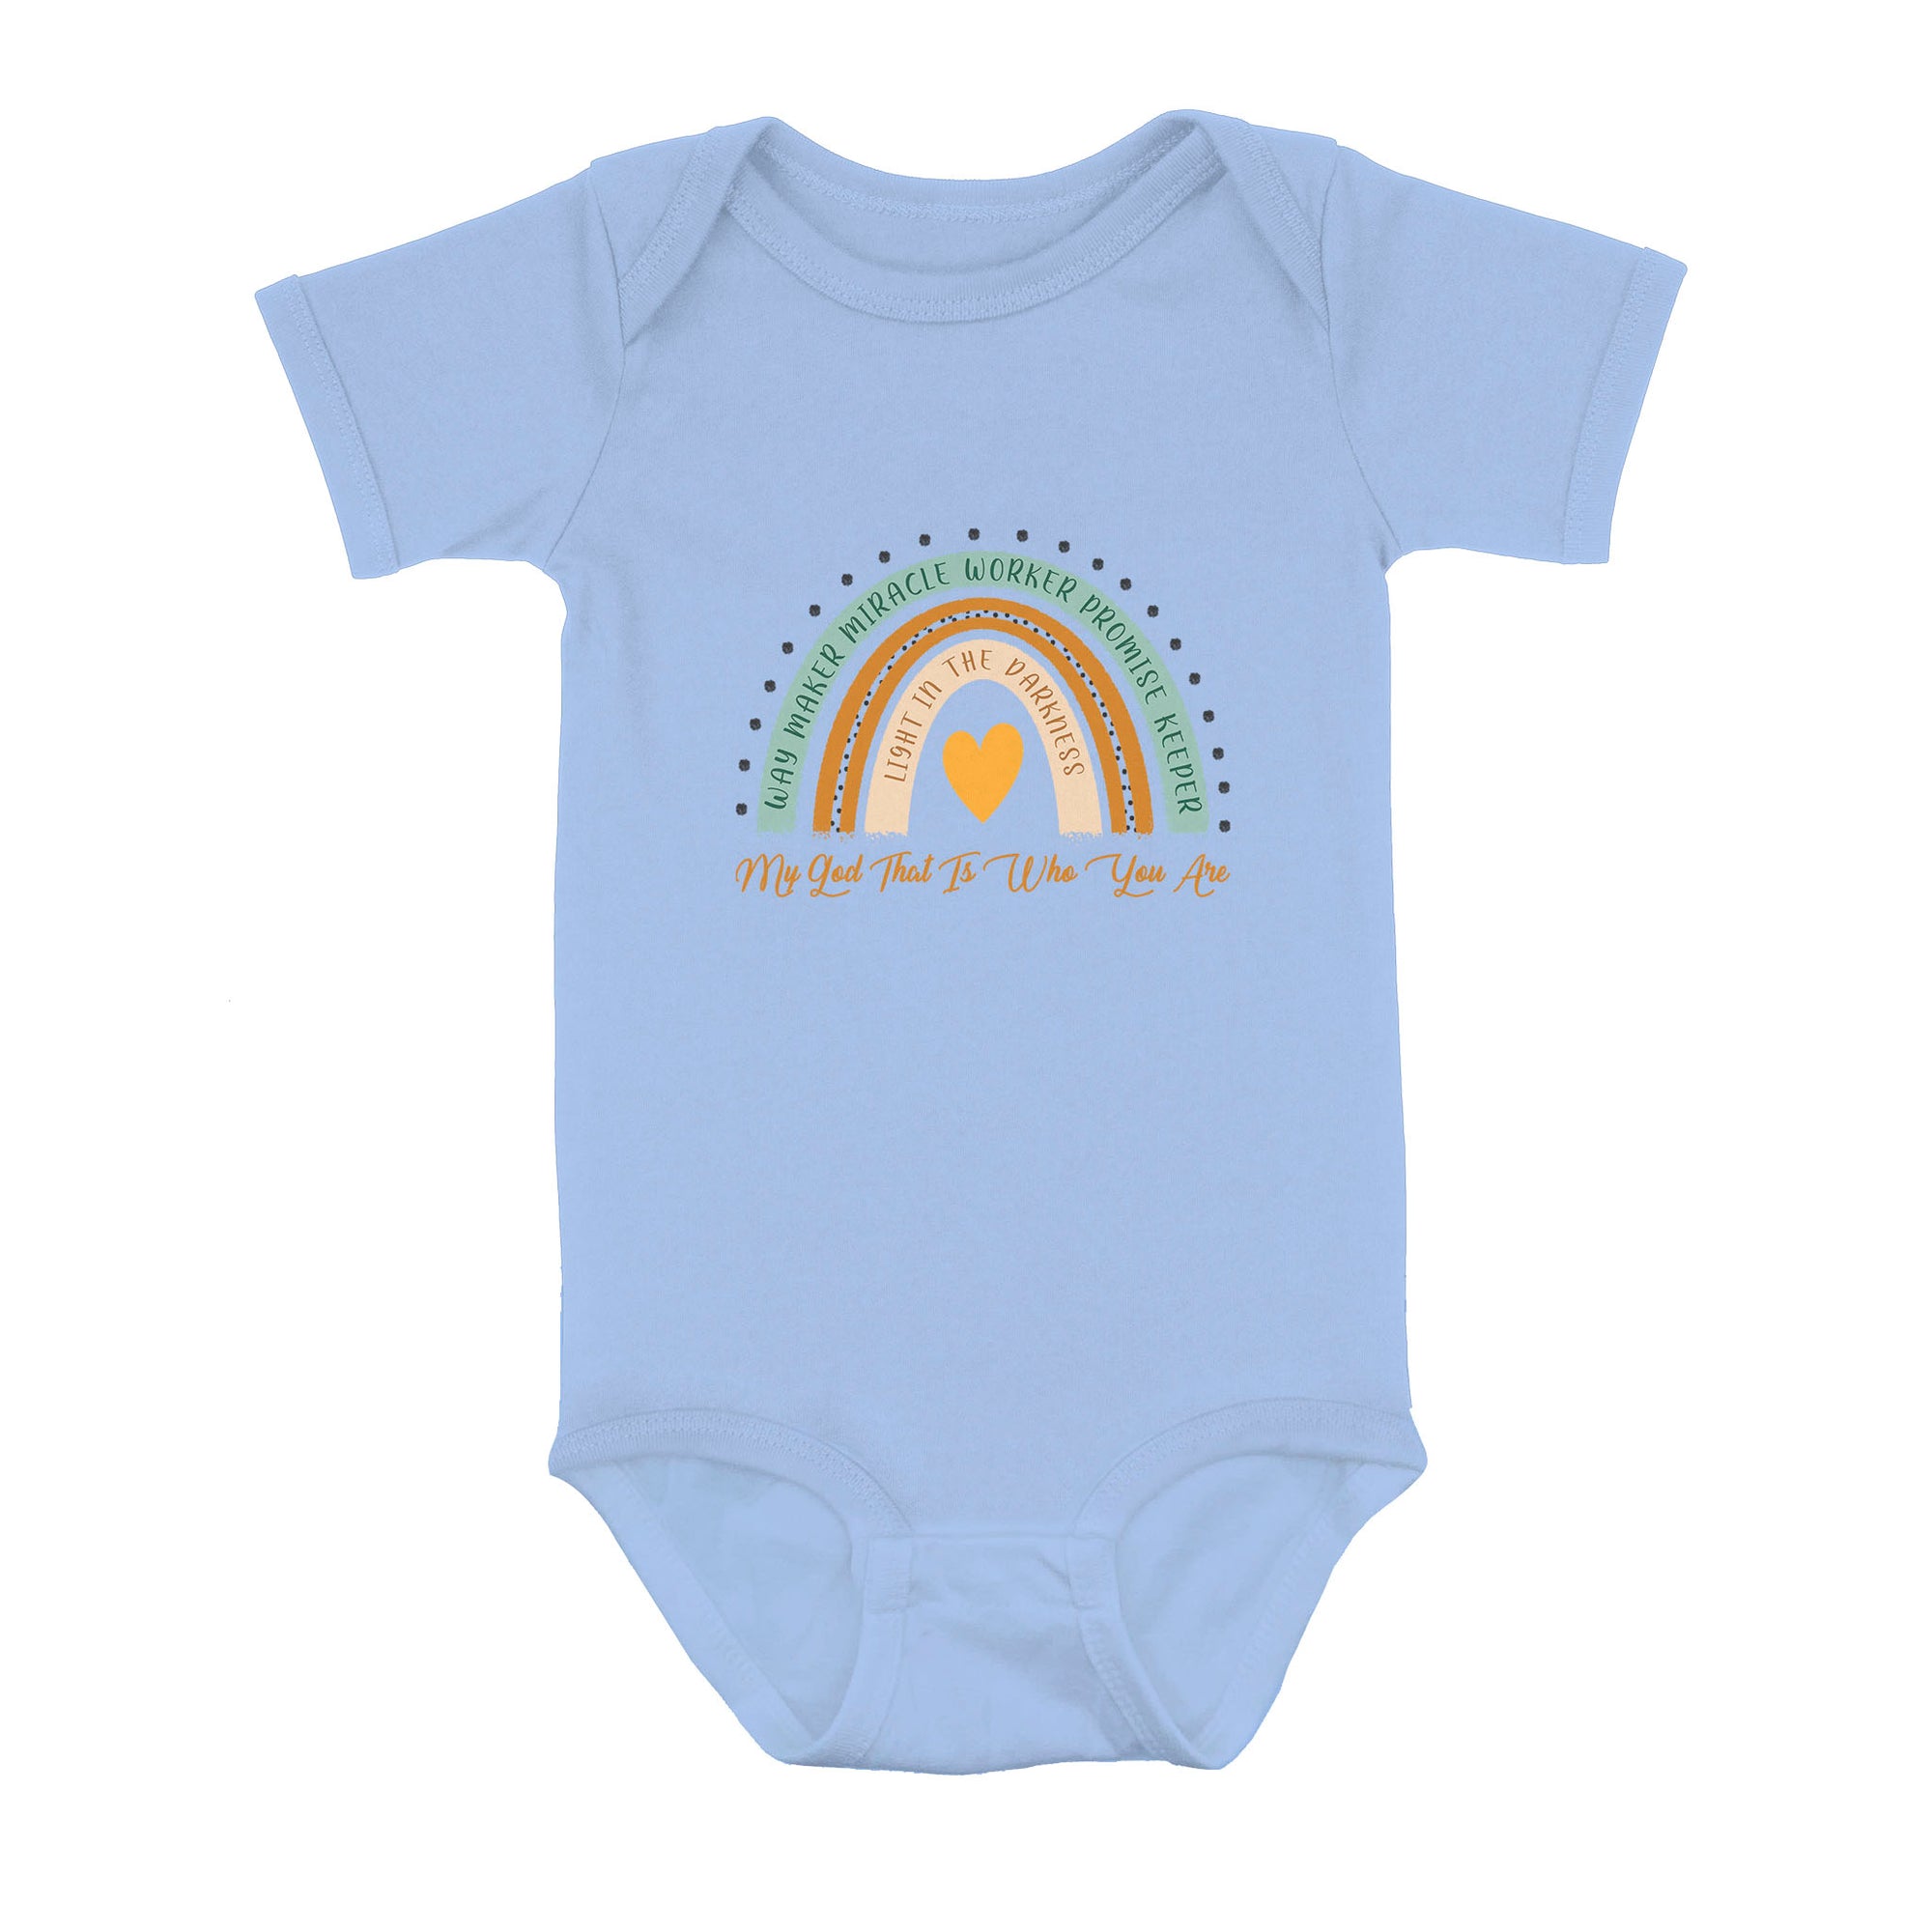 Way Maker Miracle Worker Promise Keeper Light In The Darkness - Baby Onesie